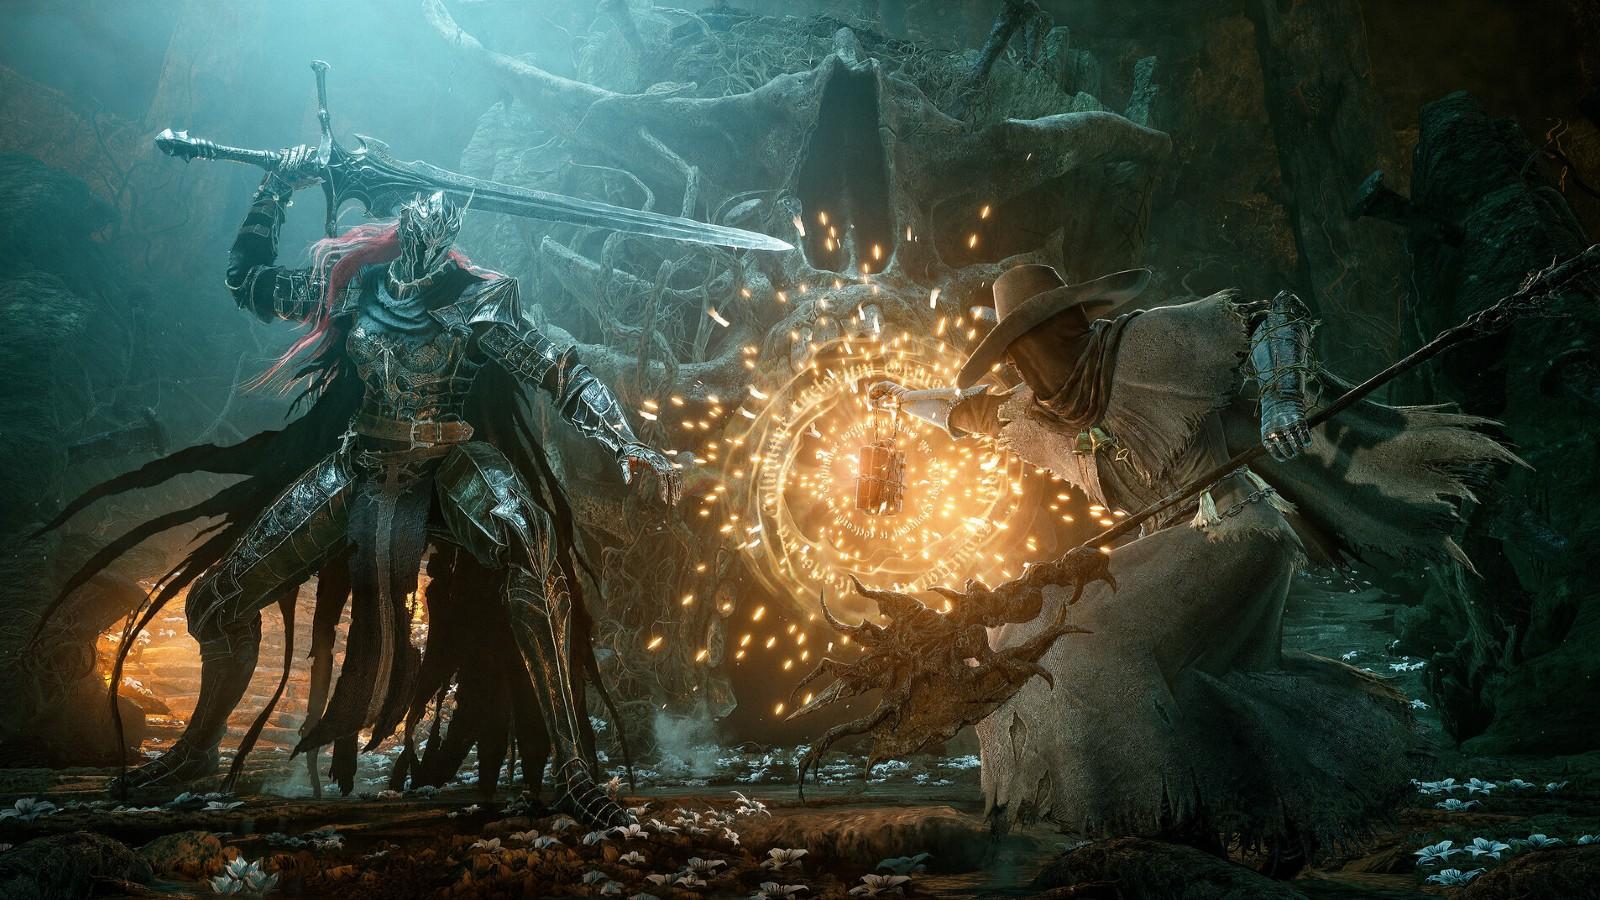 Lords of the Fallen Difficulty Settings Explained, Lords of the Fallen  Gameplay and Trailer - News